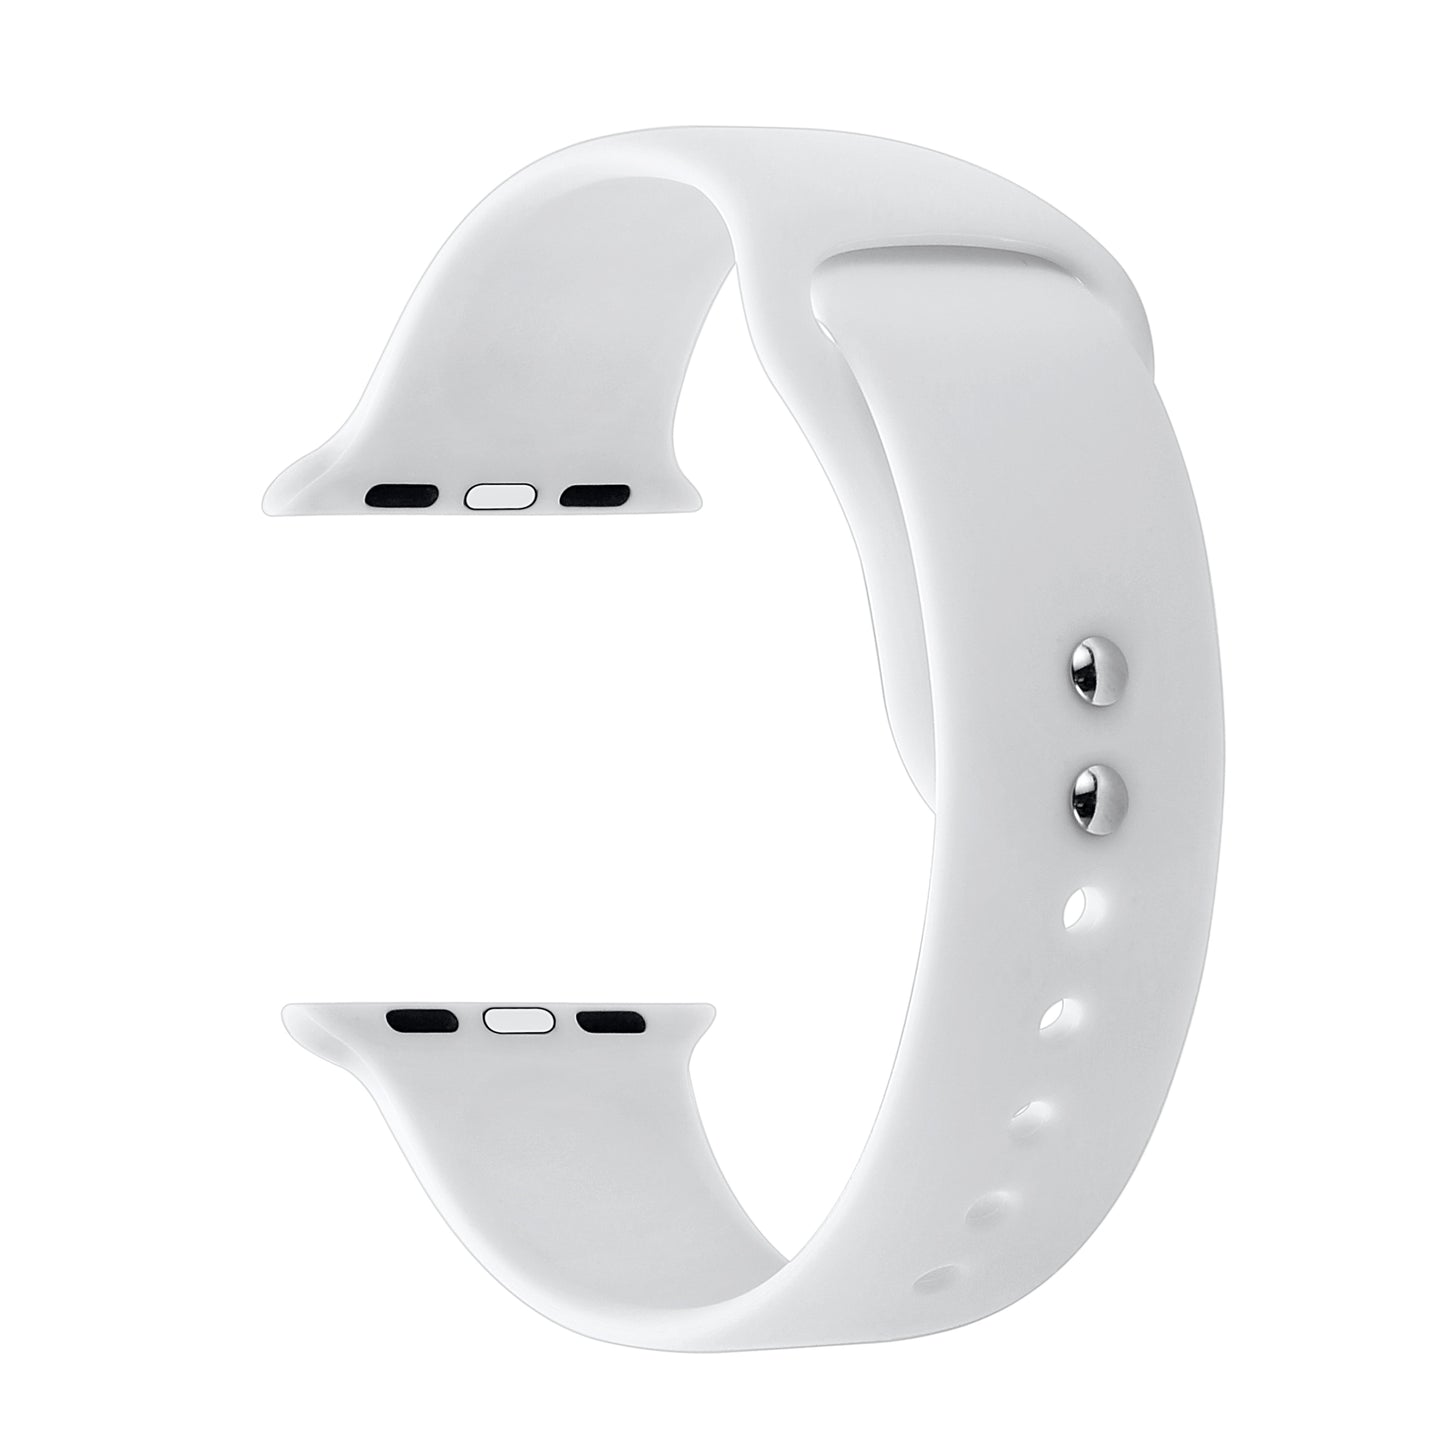 Printed Silicone Band for Apple Watch - Girl Power - FINAL SALE